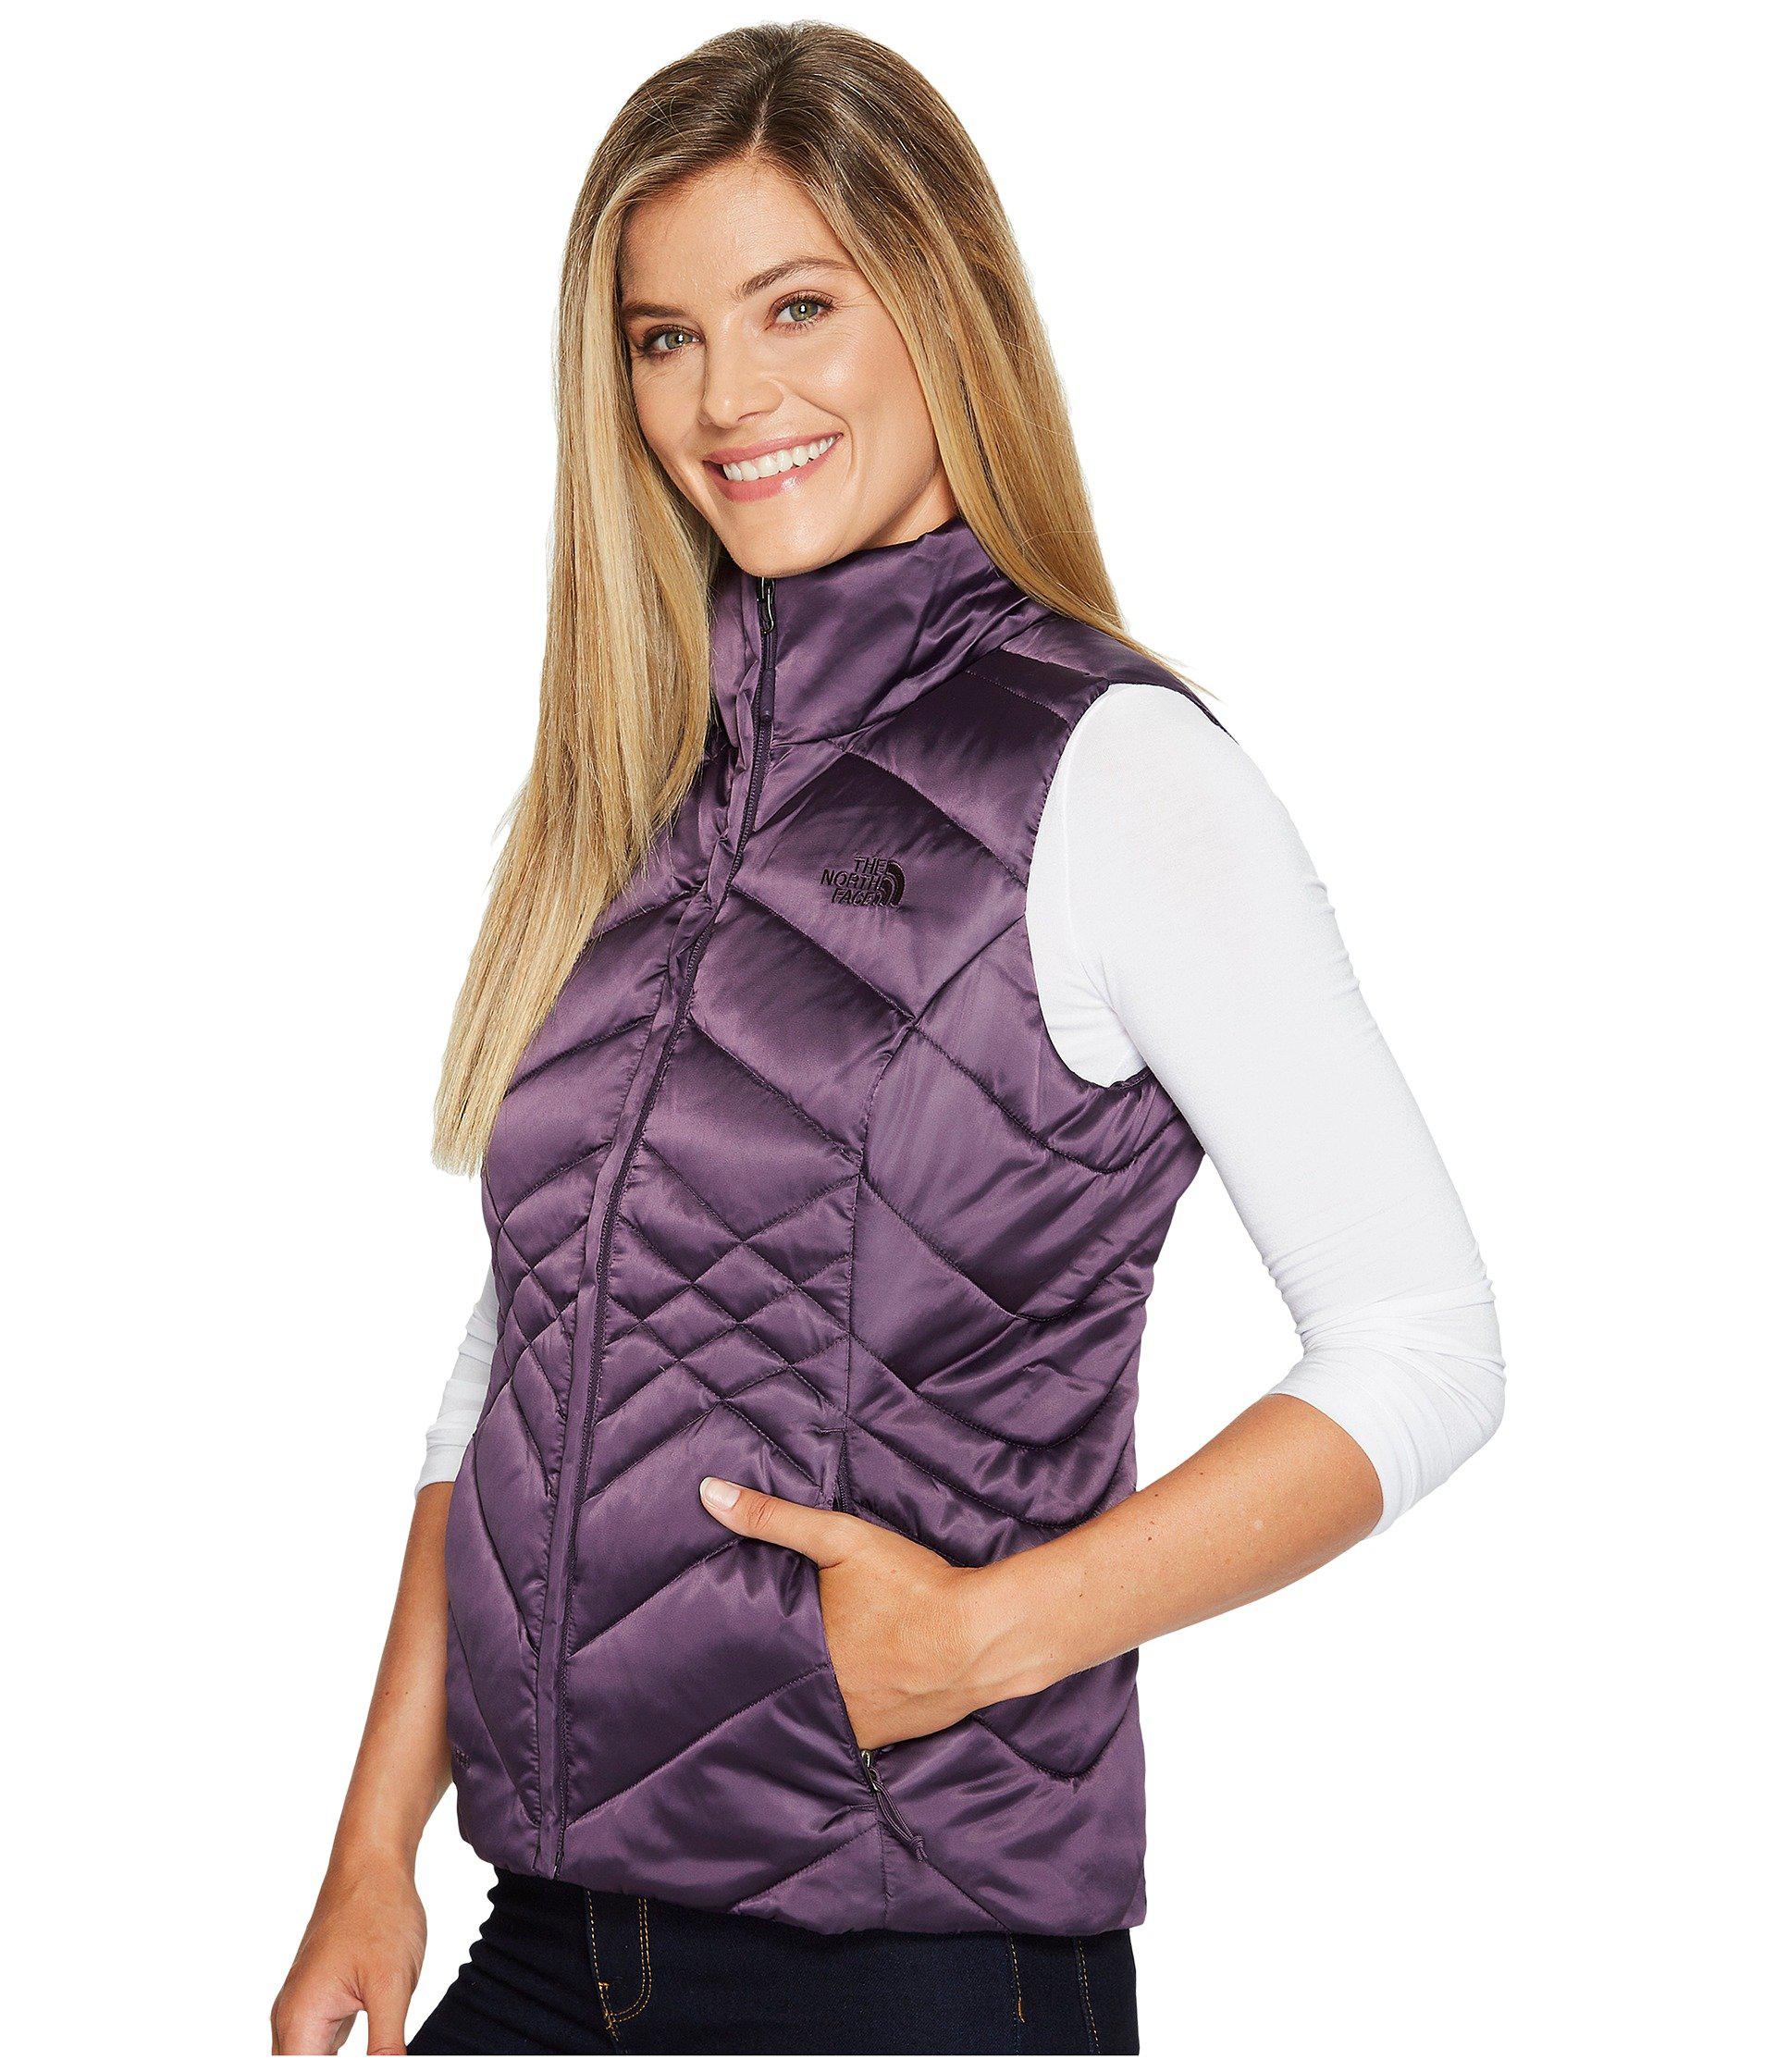 Lyst - The North Face Aconcagua Vest in Purple